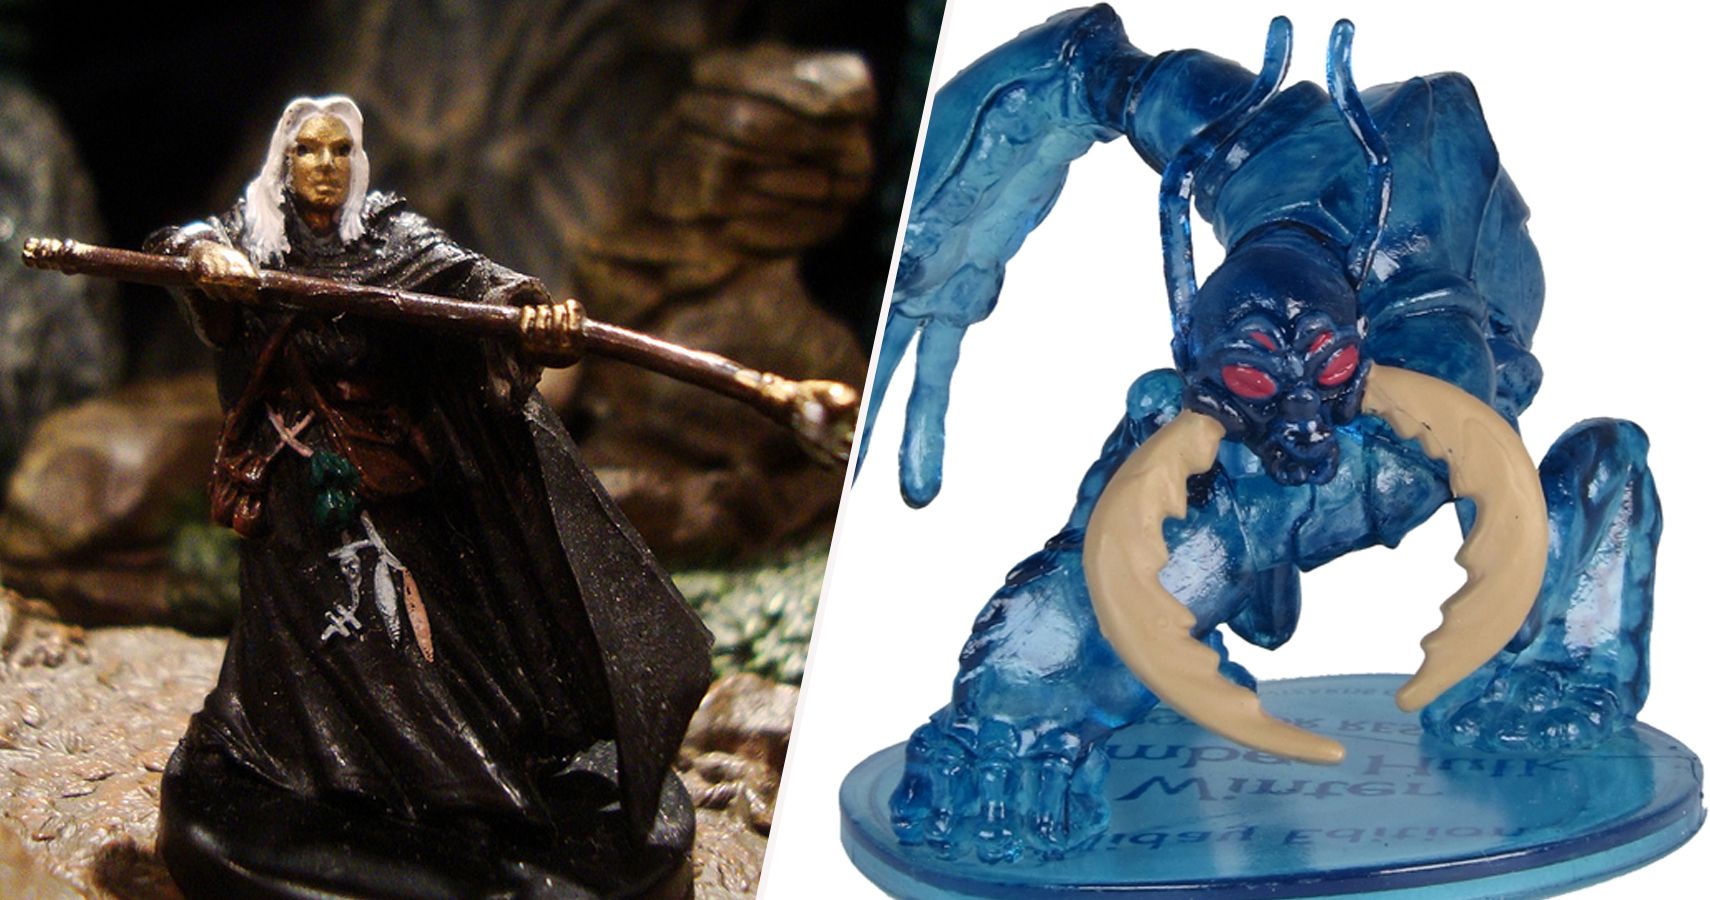 25 Of The Rarest Dungeons And Dragons Miniatures (And What They're Worth)